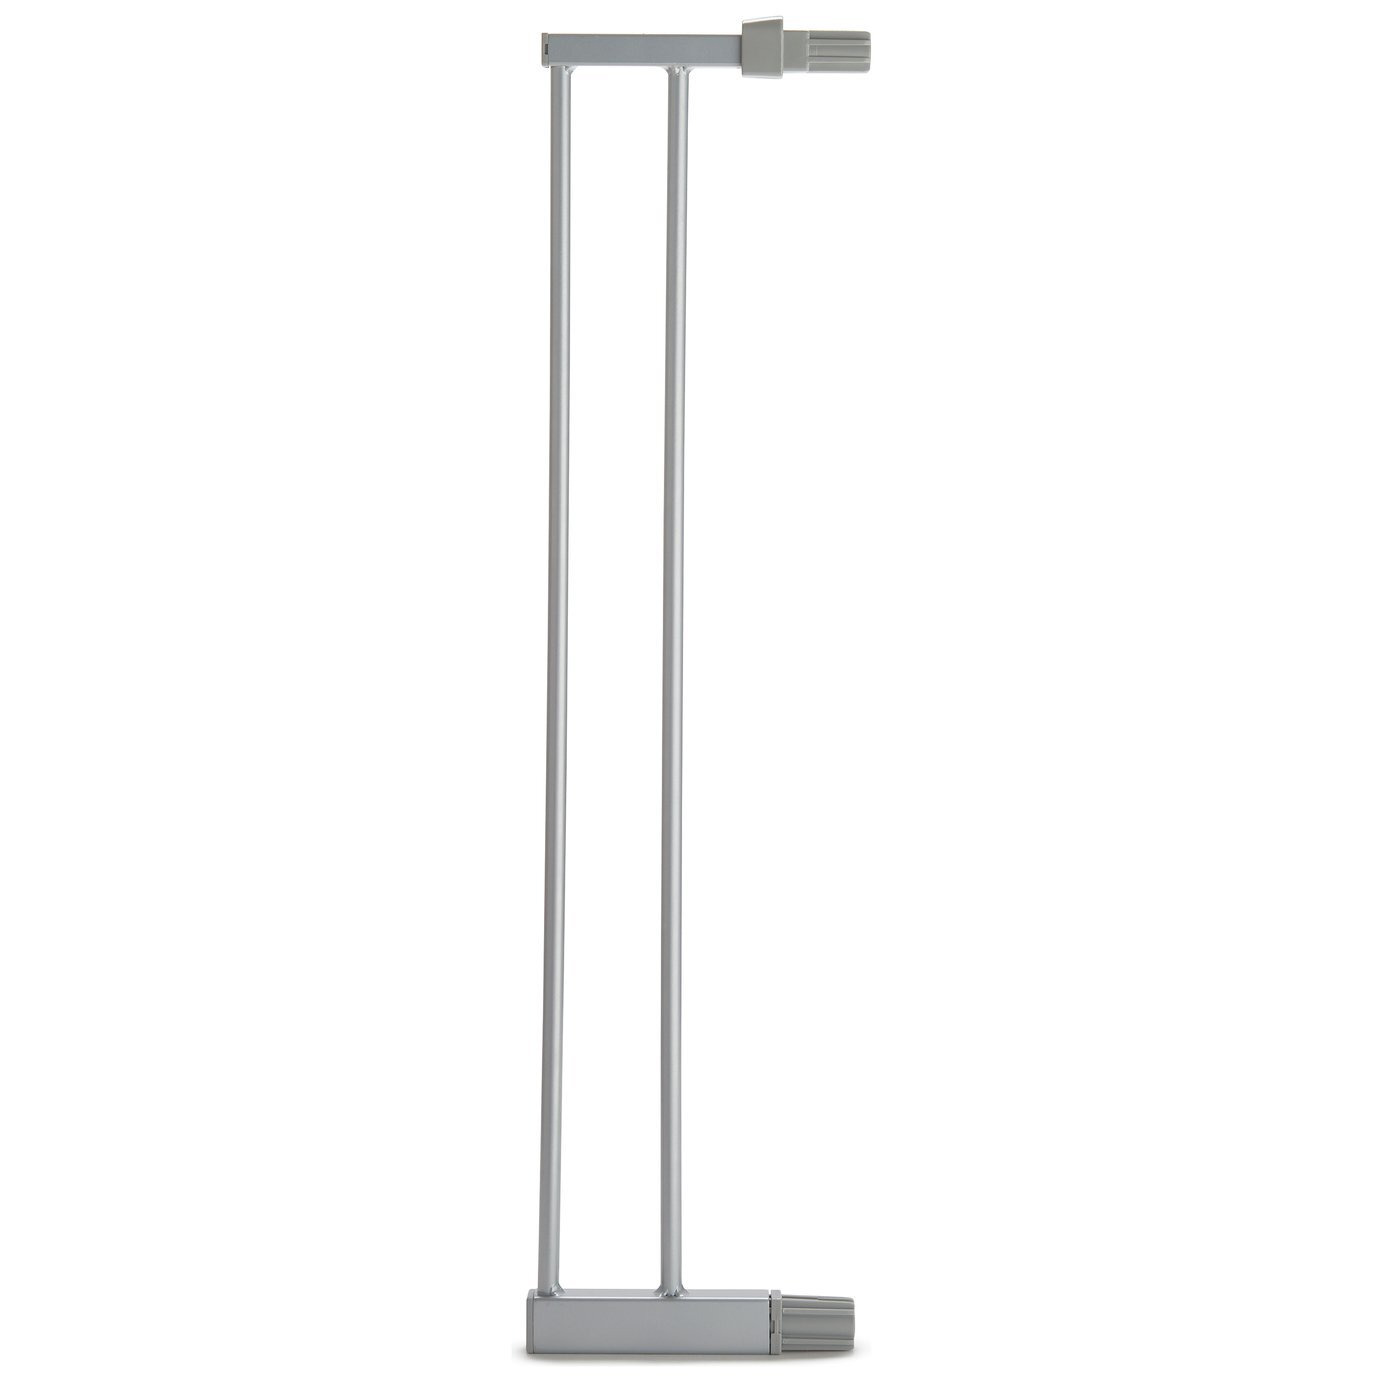 Lindam 14cm Safety Gate Silver Extension - image 1